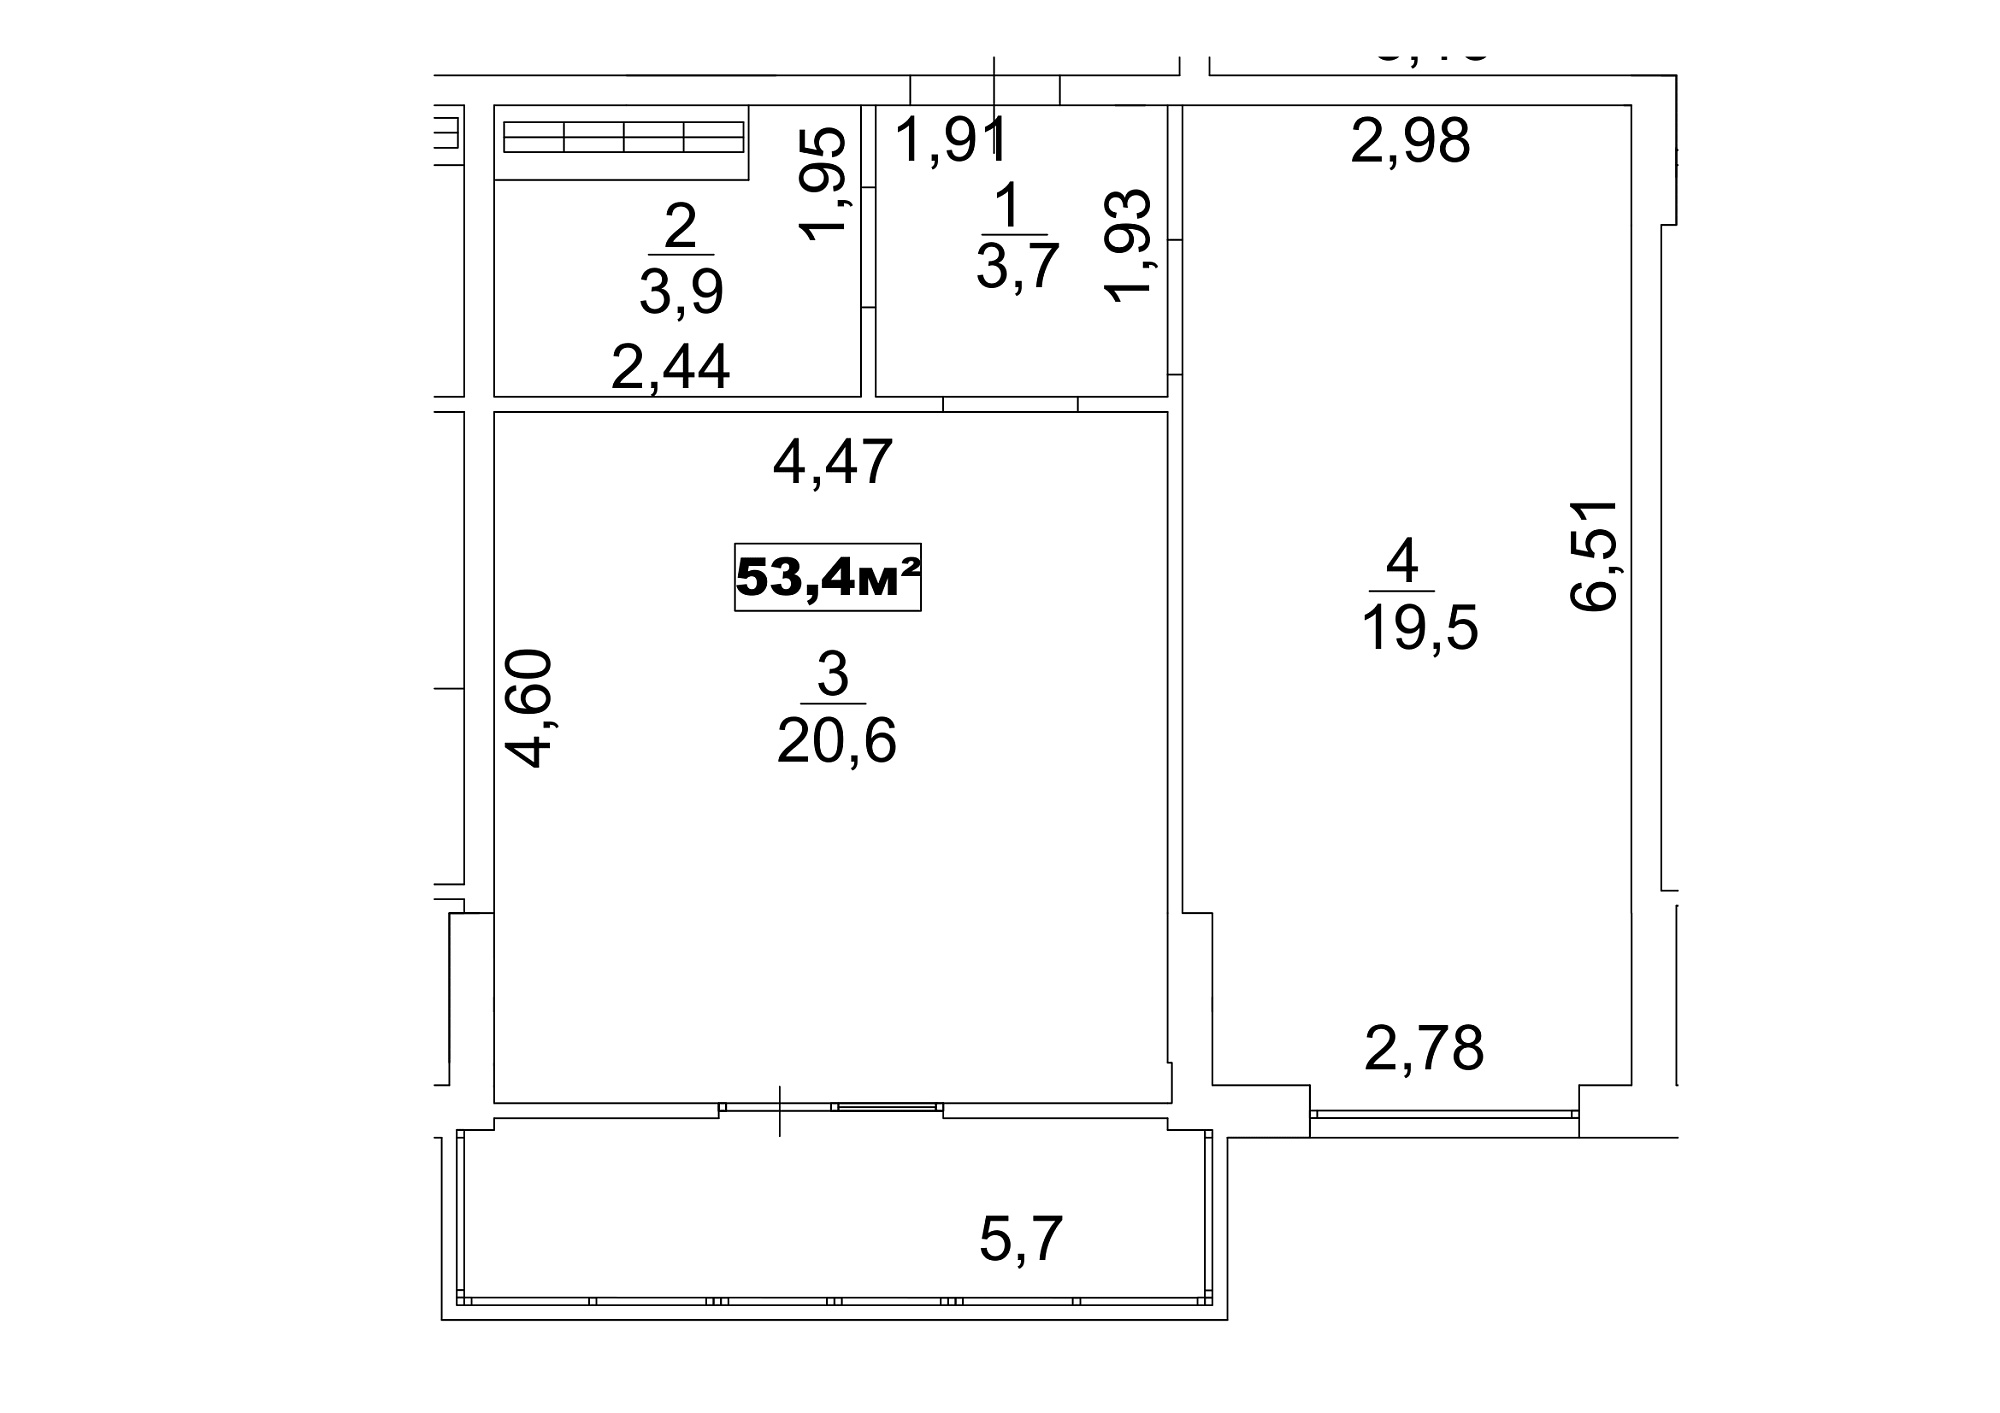 Planning 1-rm flats area 53.4m2, AB-13-04/00032.